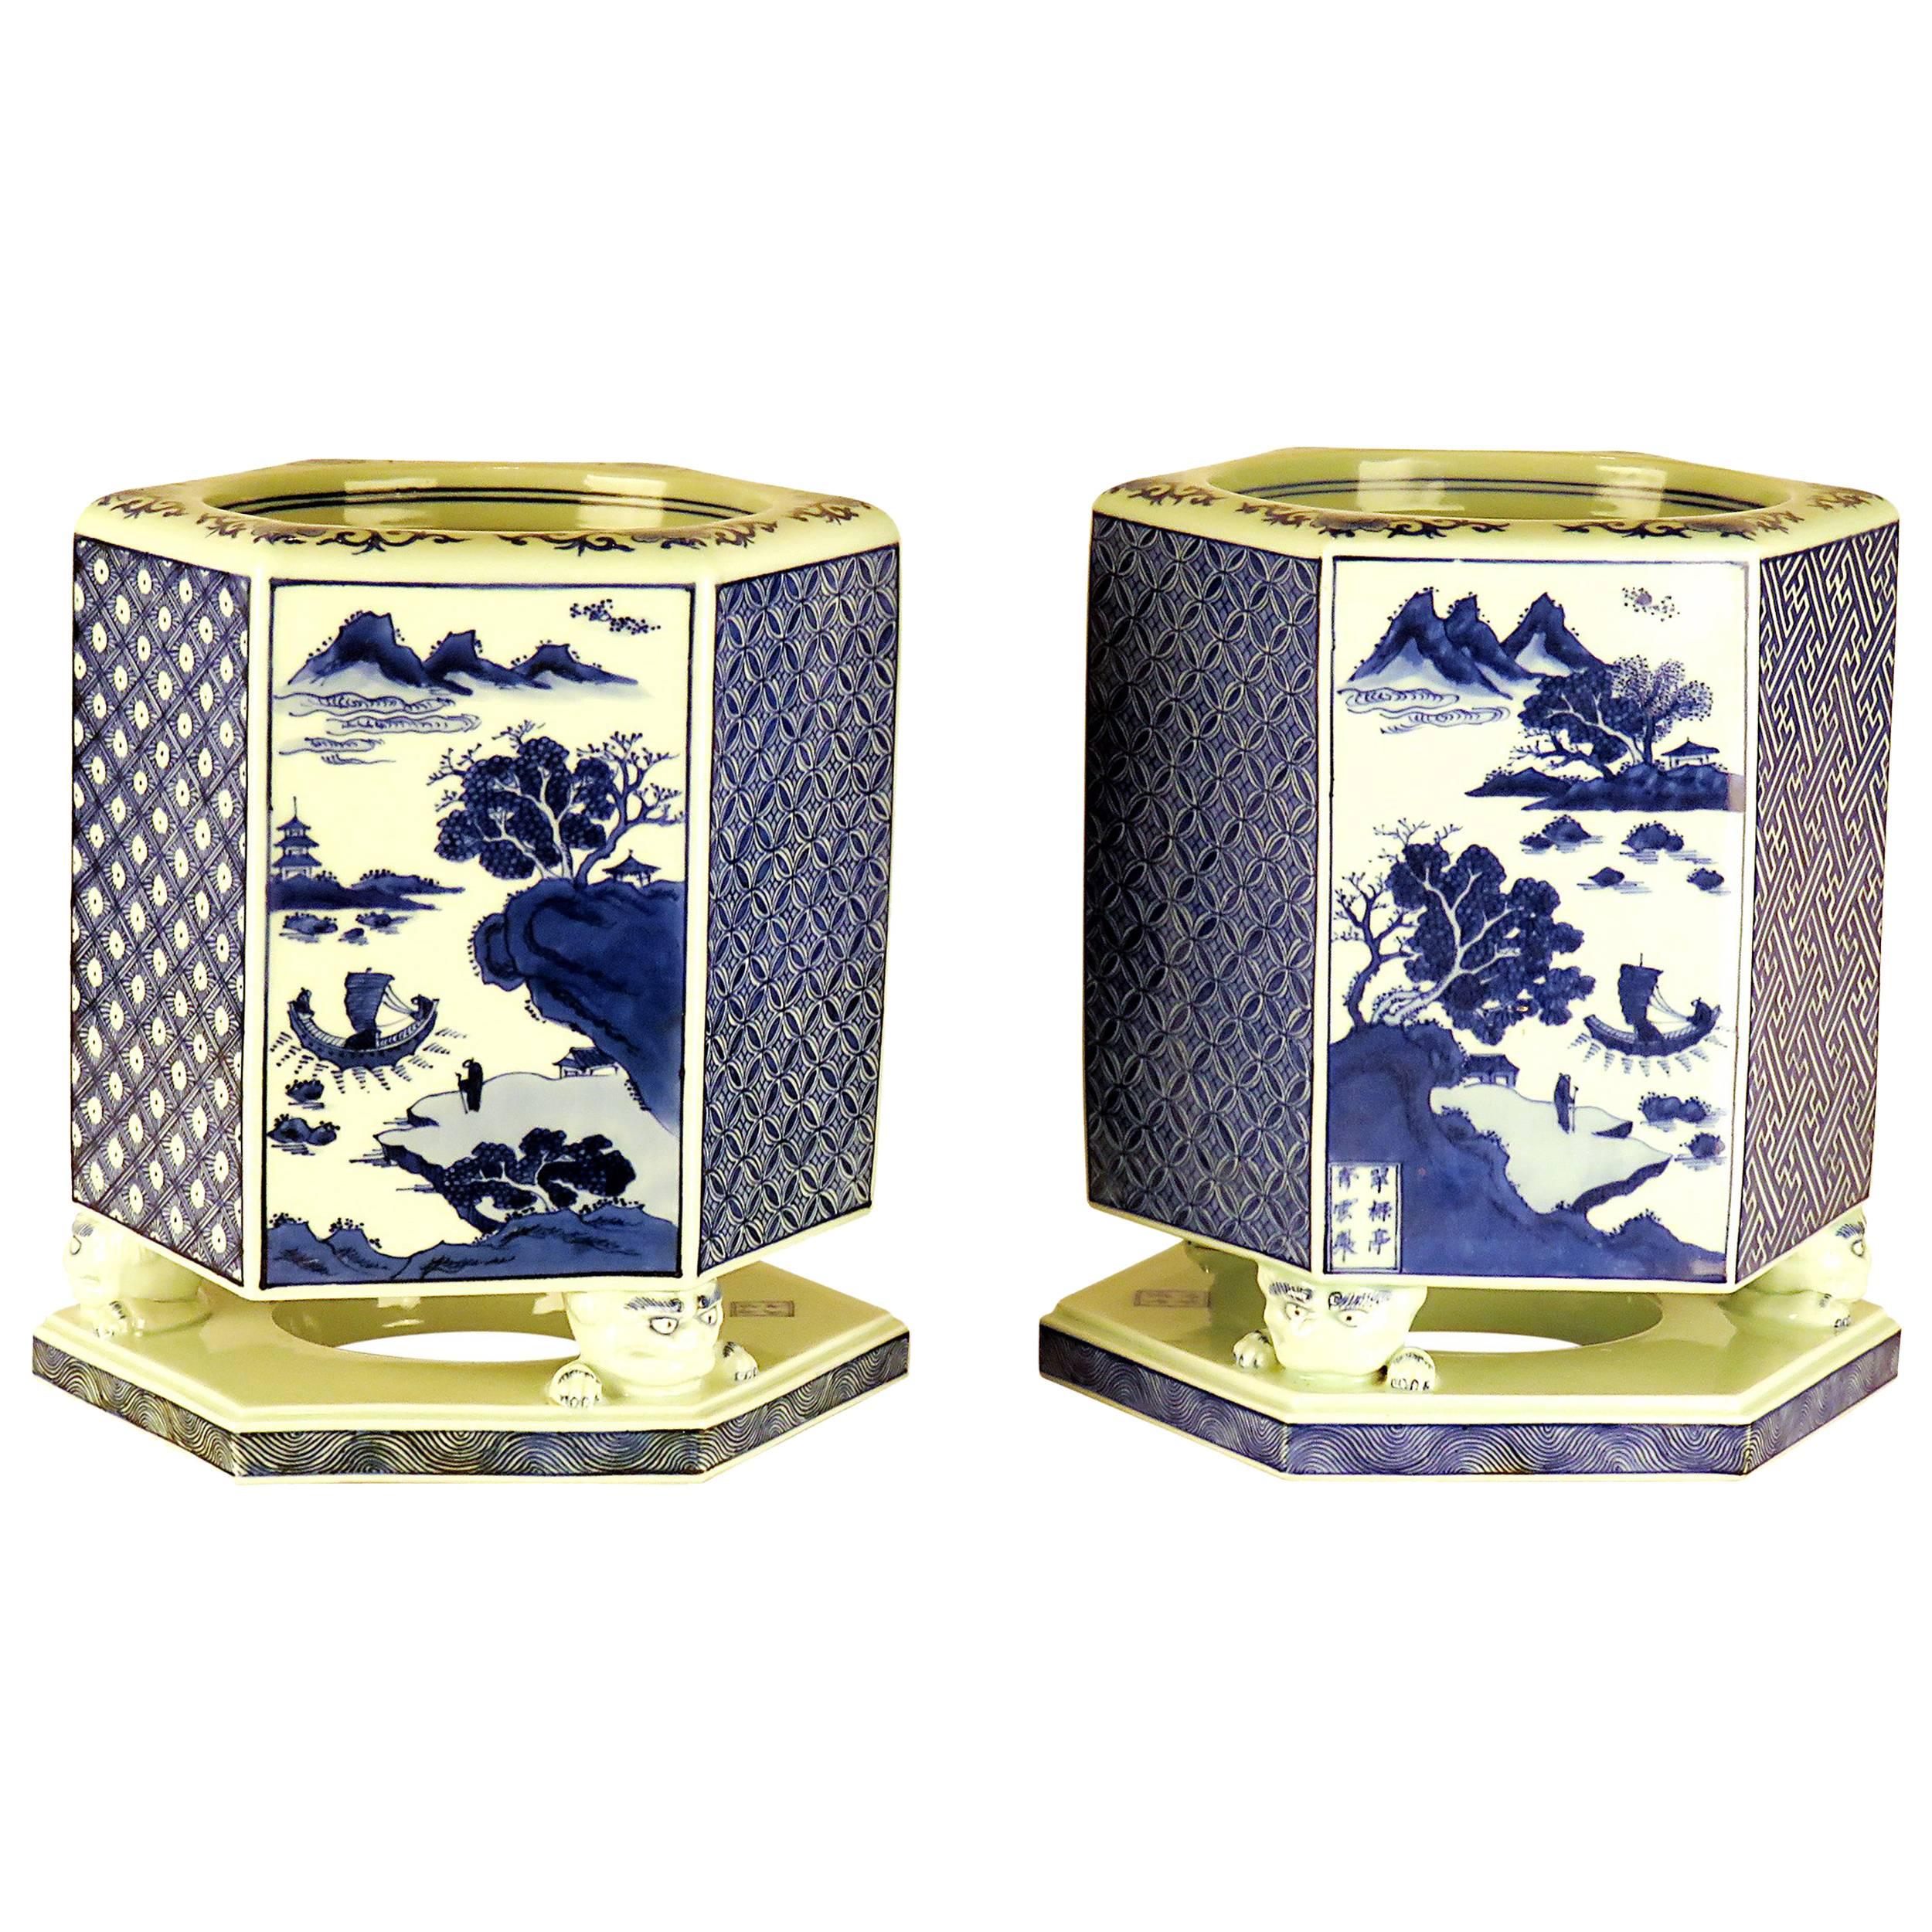 Pair of Japanese Porcelain Hibachi, Early 20th century